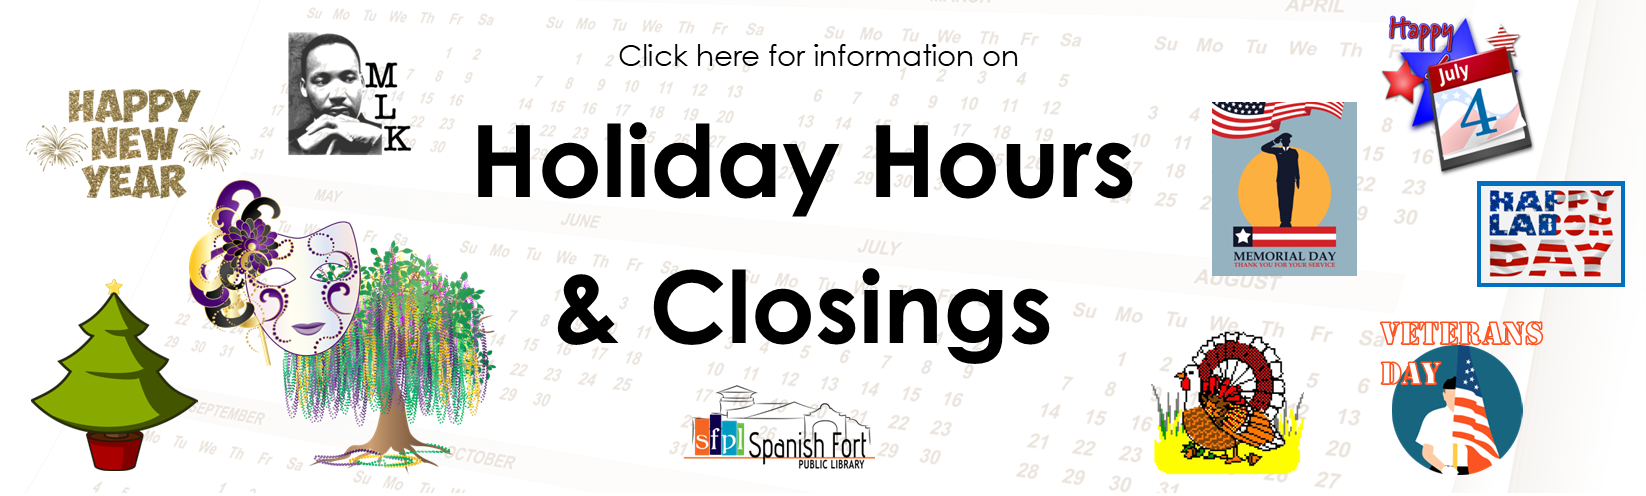 Click here for information on Holiday Hours and Closings